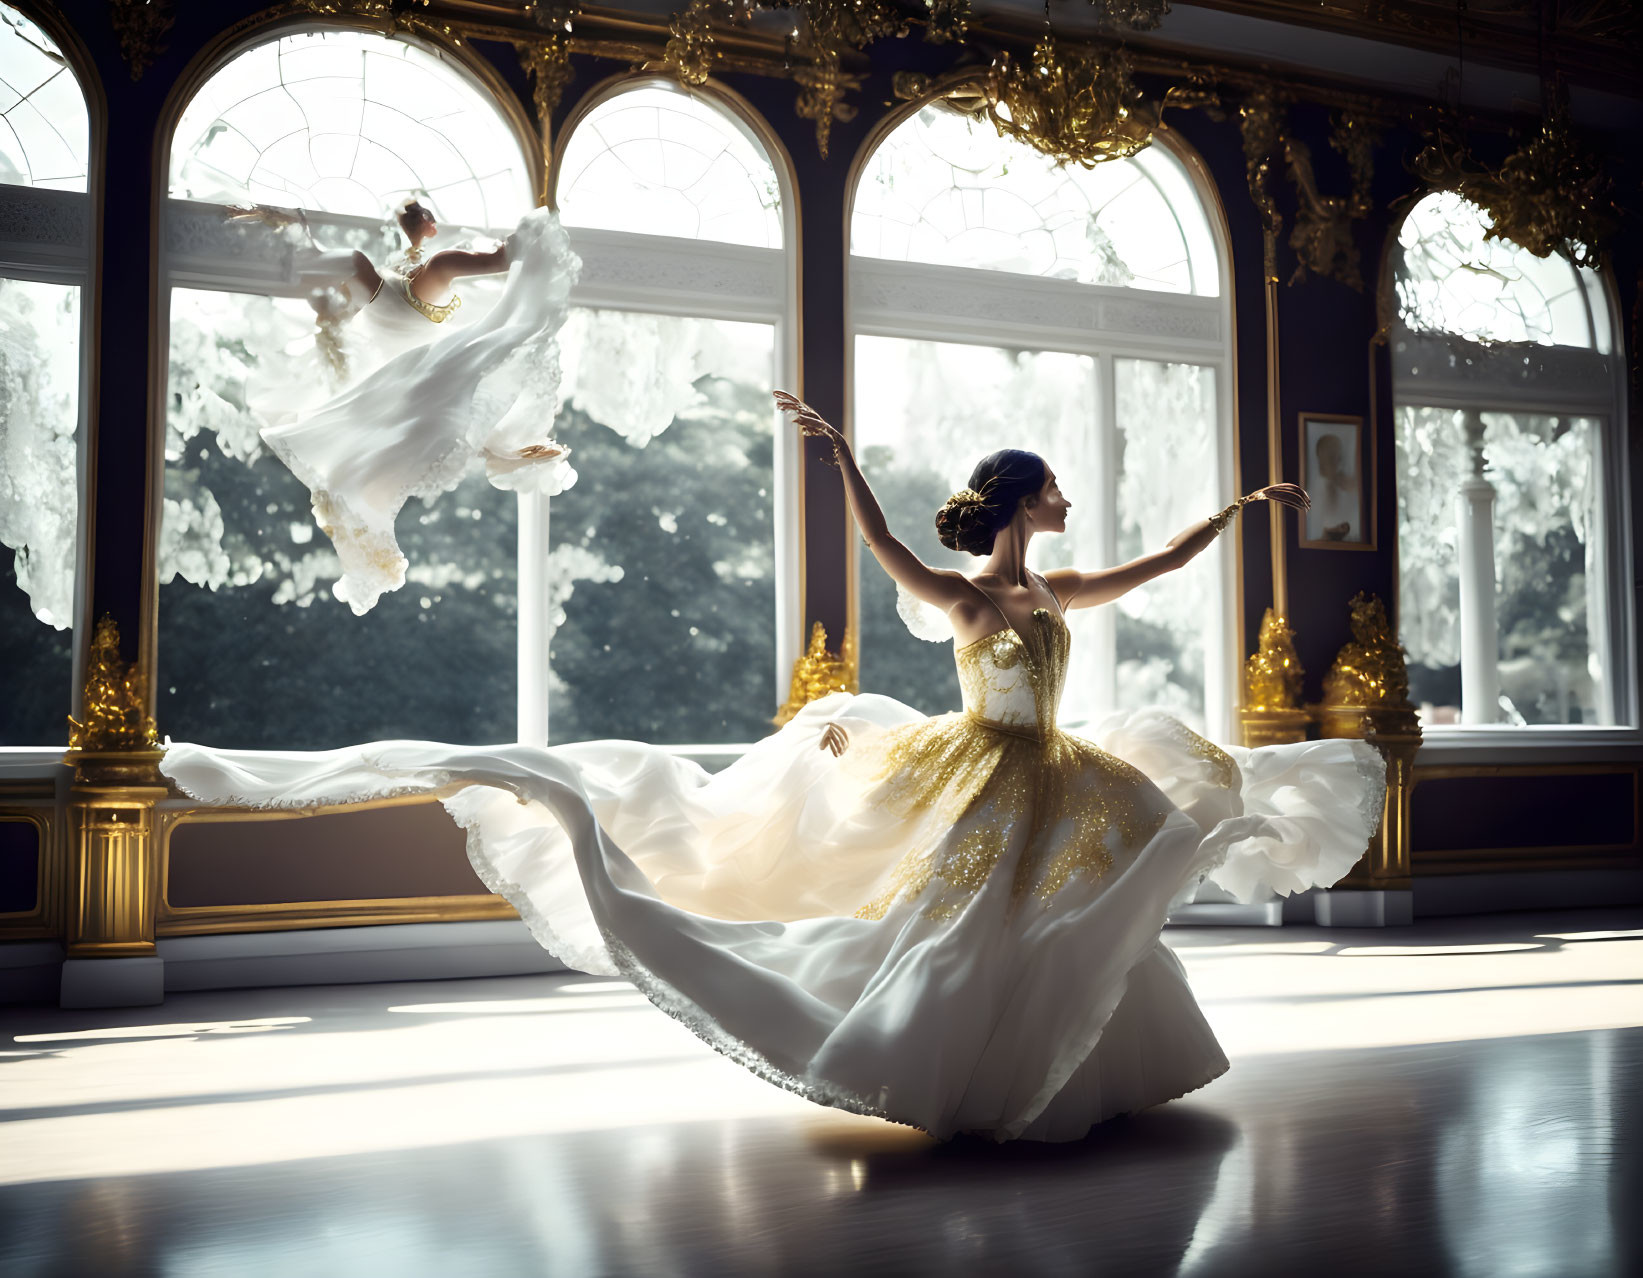 Graceful ballerina twirls in white and gold dress in lavish room with large windows.